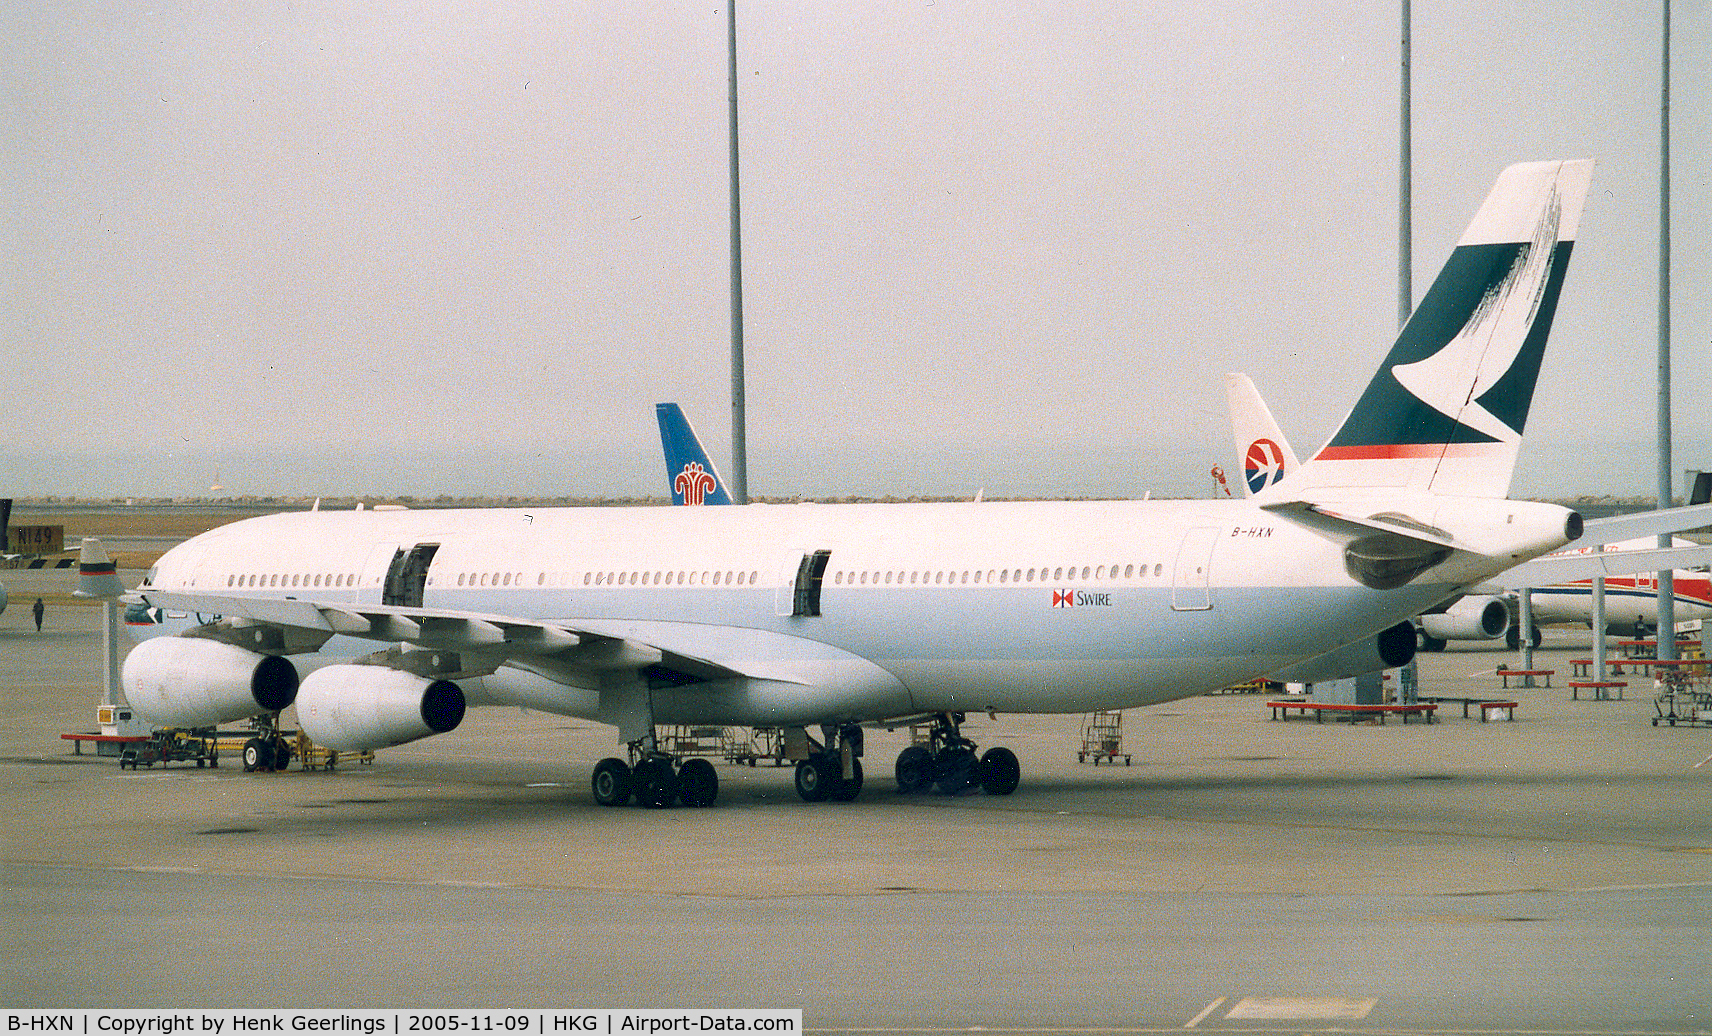 B-HXN, 1996 Airbus A340-313 C/N 126, Cathay Pacific